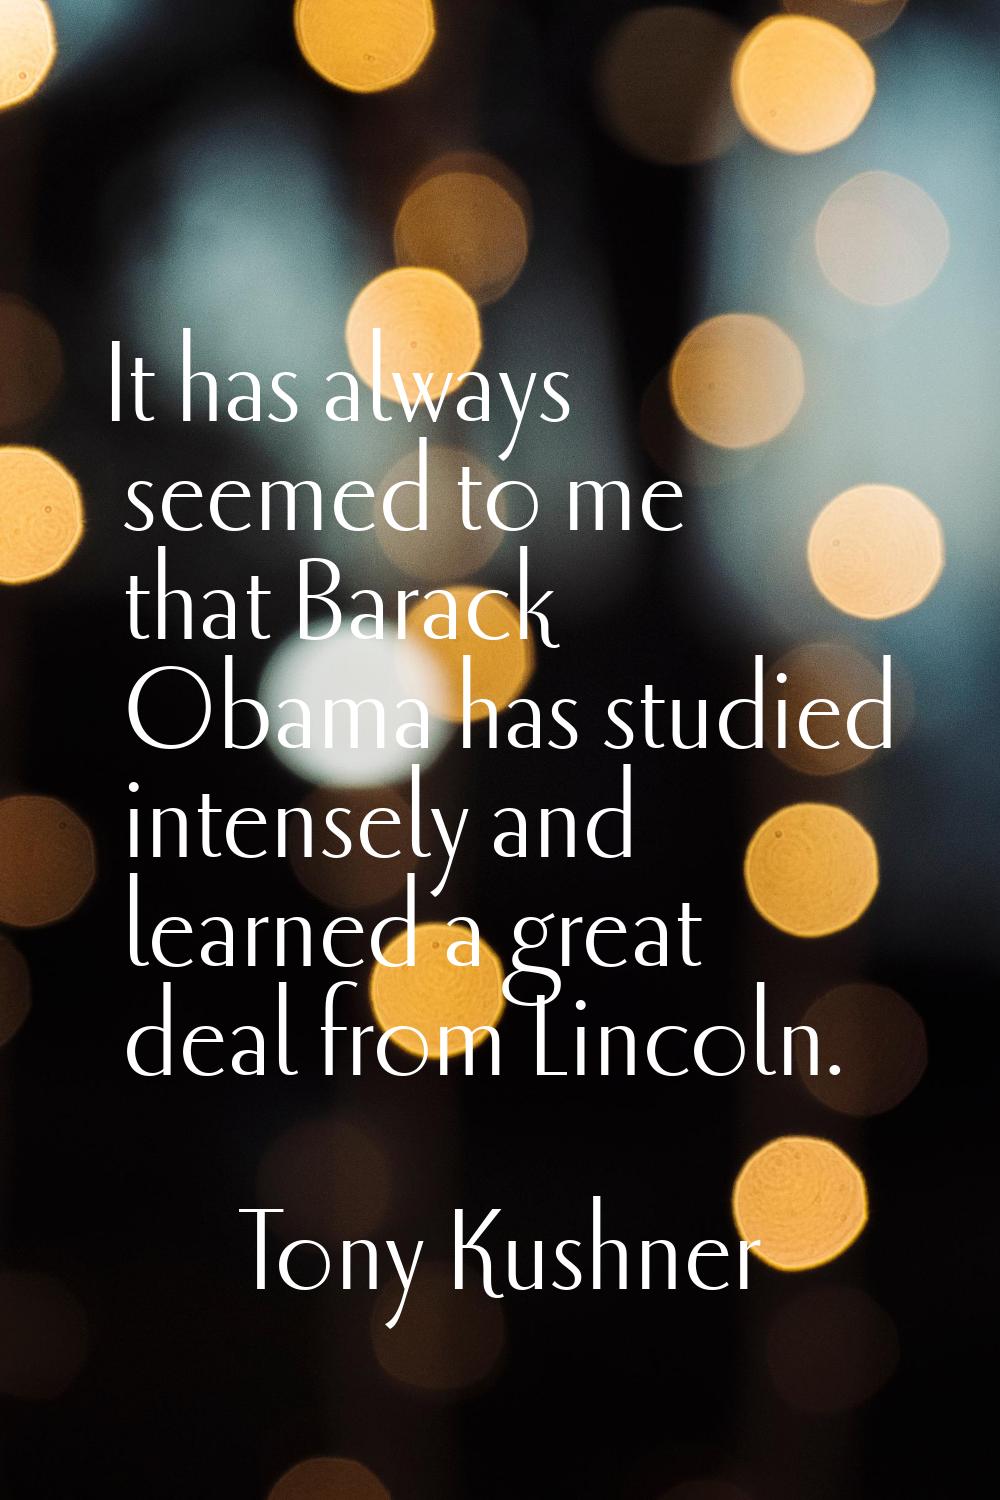 It has always seemed to me that Barack Obama has studied intensely and learned a great deal from Li